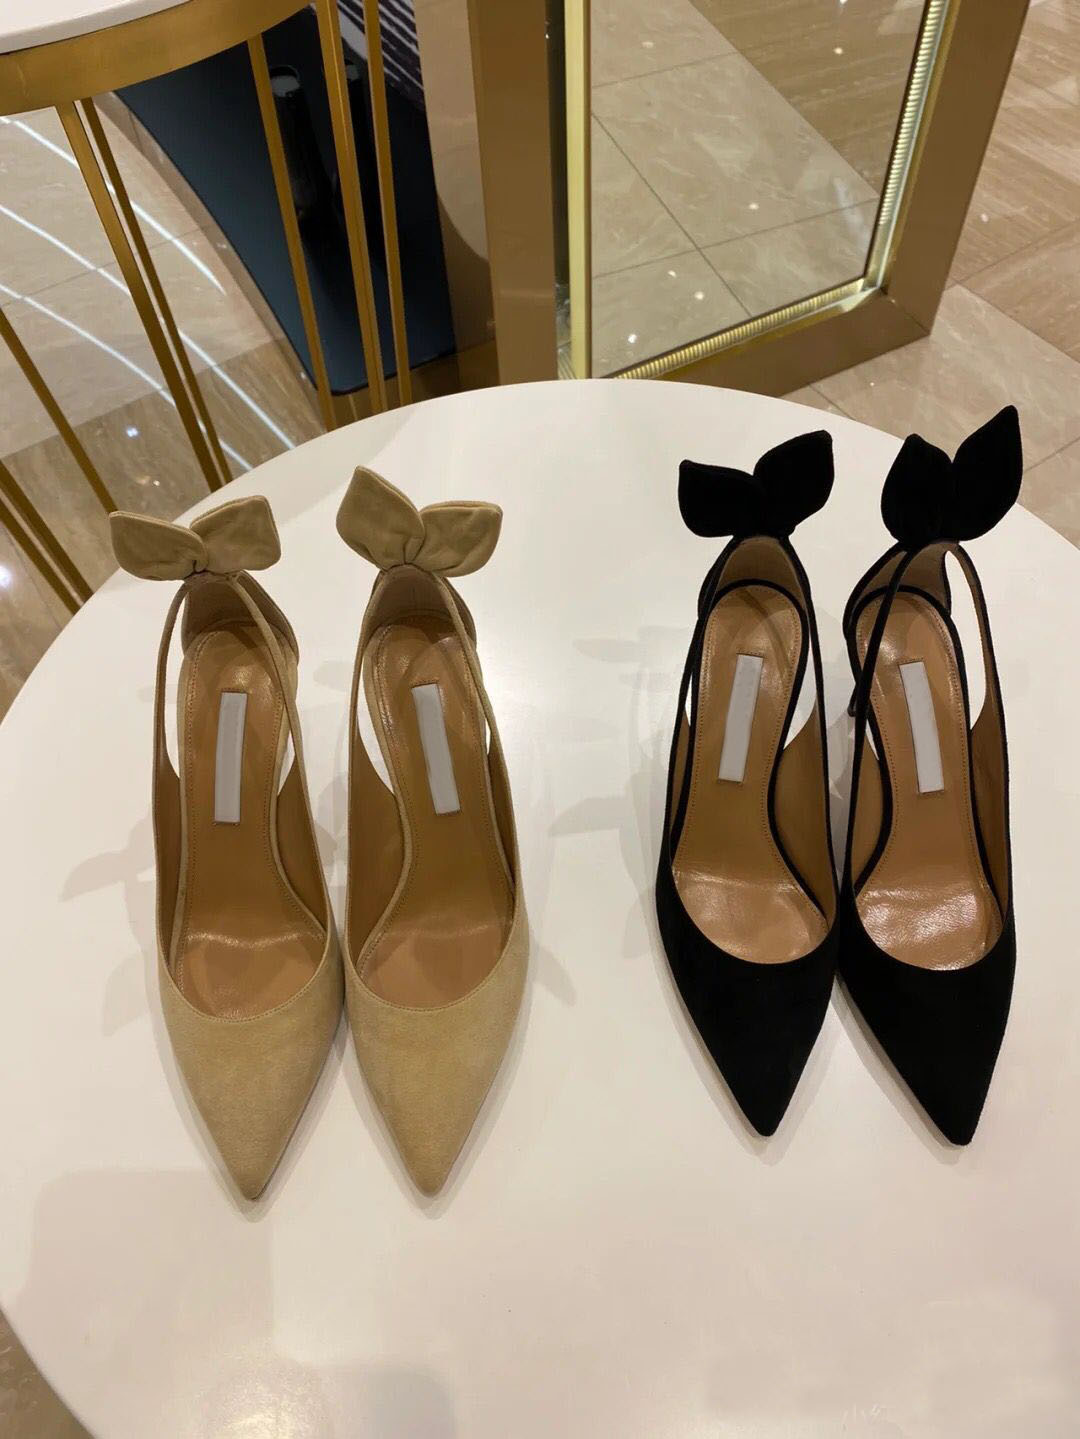 

Woman Pop Heels Sexy Sandal Pointed Toe Aquazzura Bow Tie Cutout Leather Pumps Slingback Wedding Party Dress Pump Black Nude Suede Leather, 02